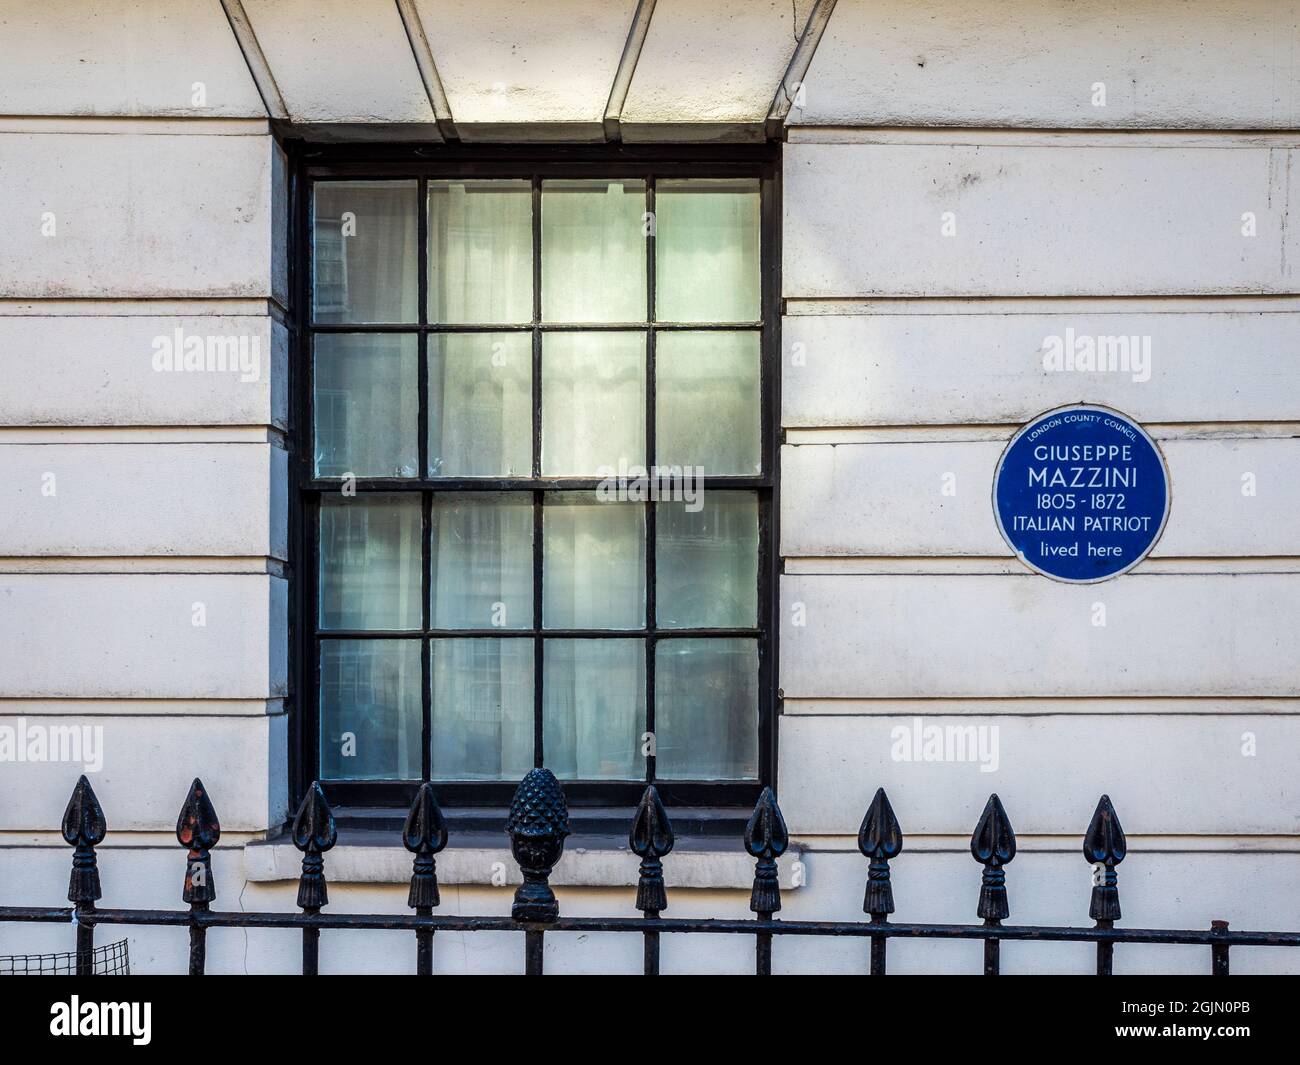 Guiseppe Mazzini Blue Plaque London at 183 North Gower Street Bloomsbury London. GIUSEPPE MAZZINI 1805-1872 ITALIAN PATRIOT lived here. Stock Photo